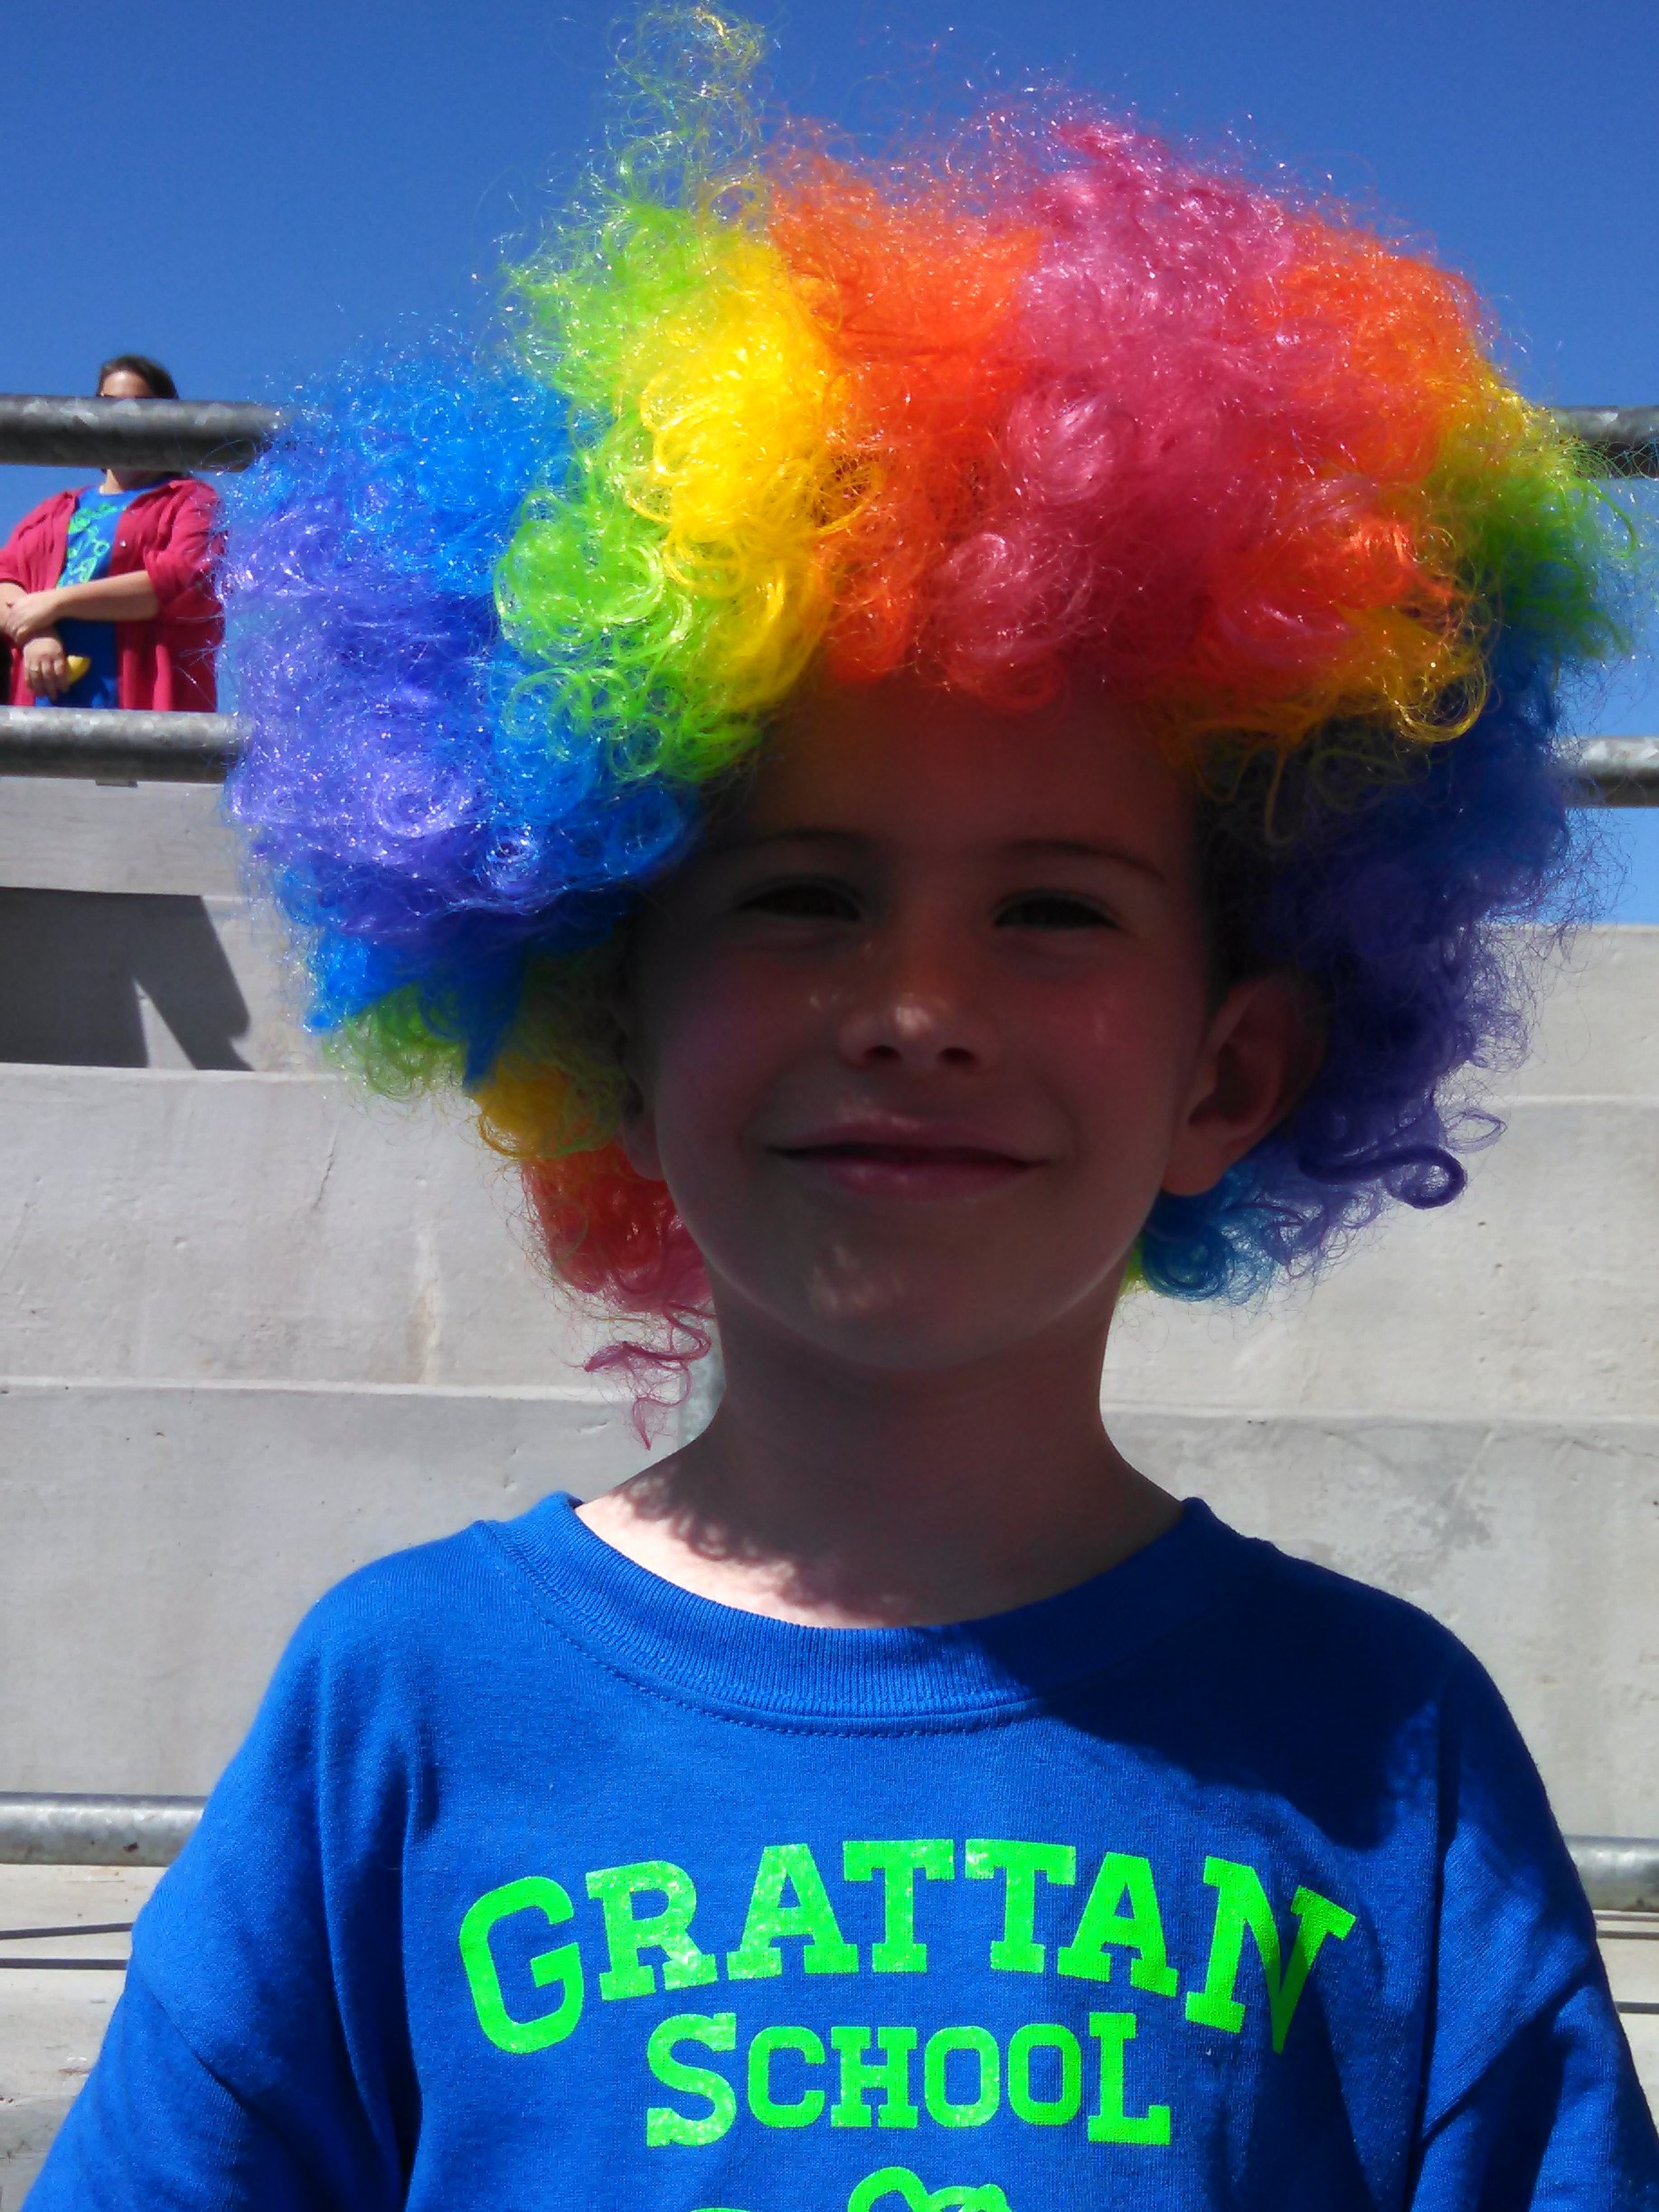 Child wearing rainbow wig at an outdoor school fitness event